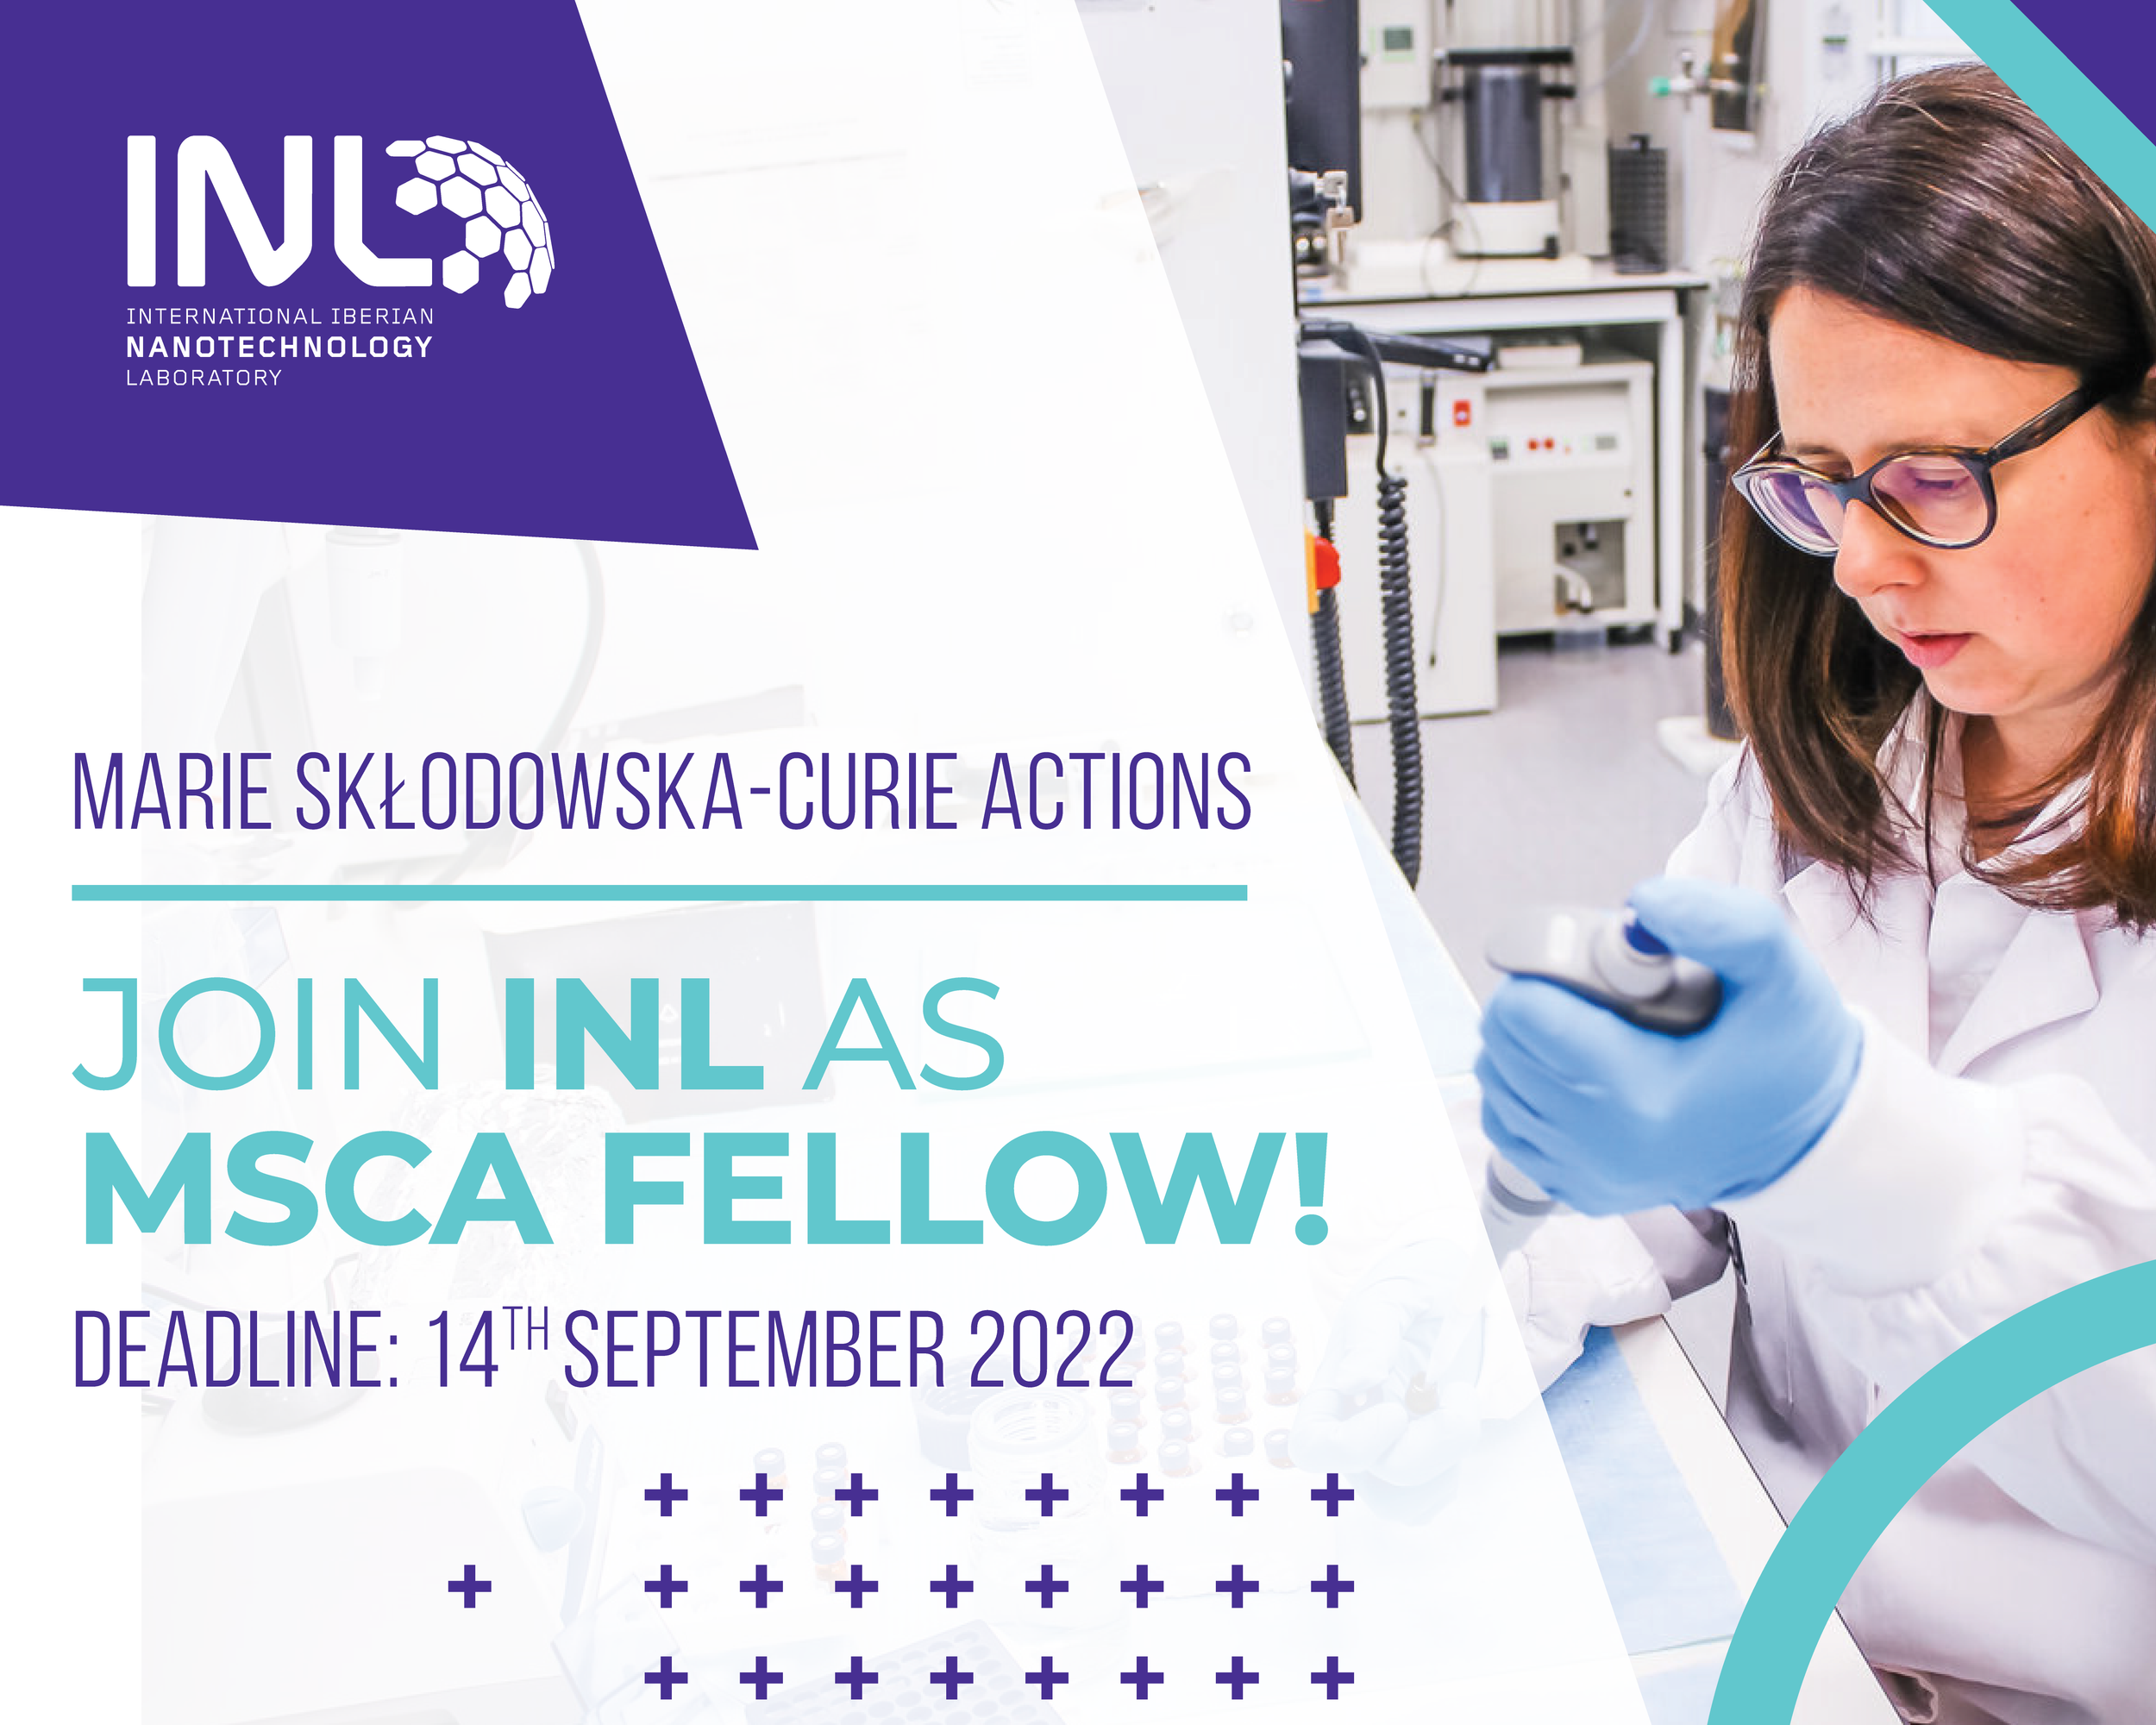 Thinking about taking your career to the next level? Join INL as a MSCA Fellow!